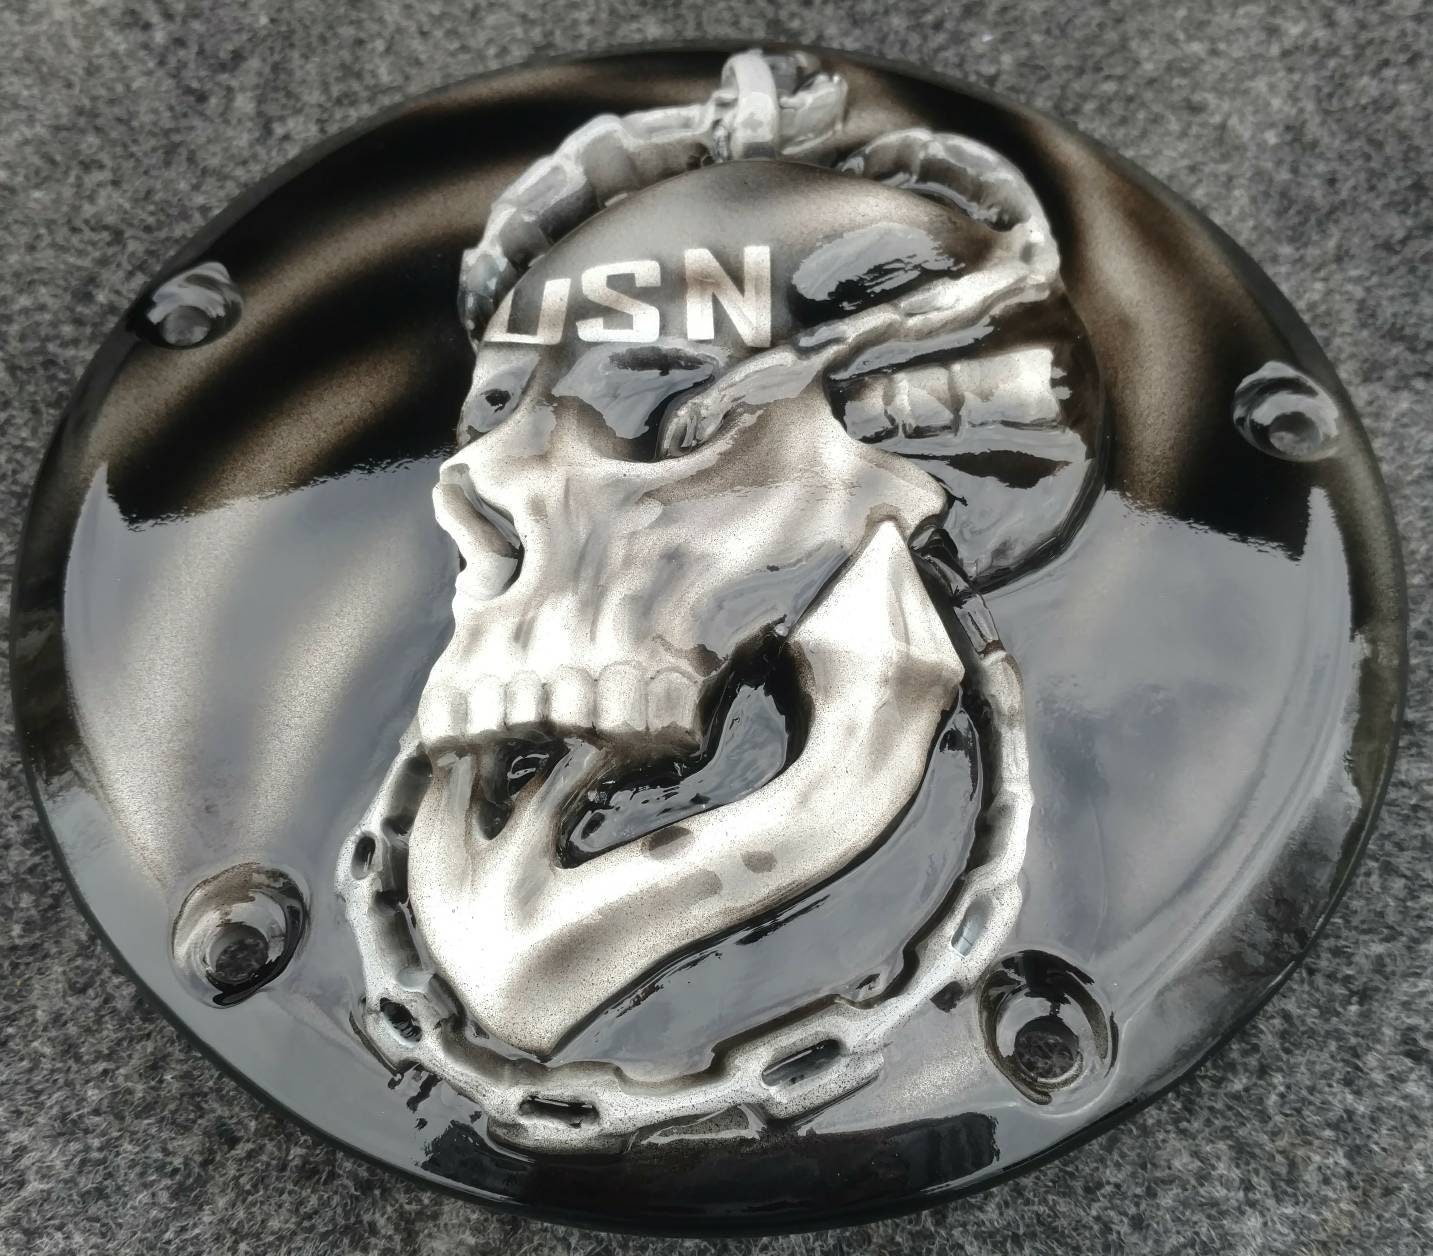 3D US Navy skull and anchor on a Harley-Davidson derby clutch cover